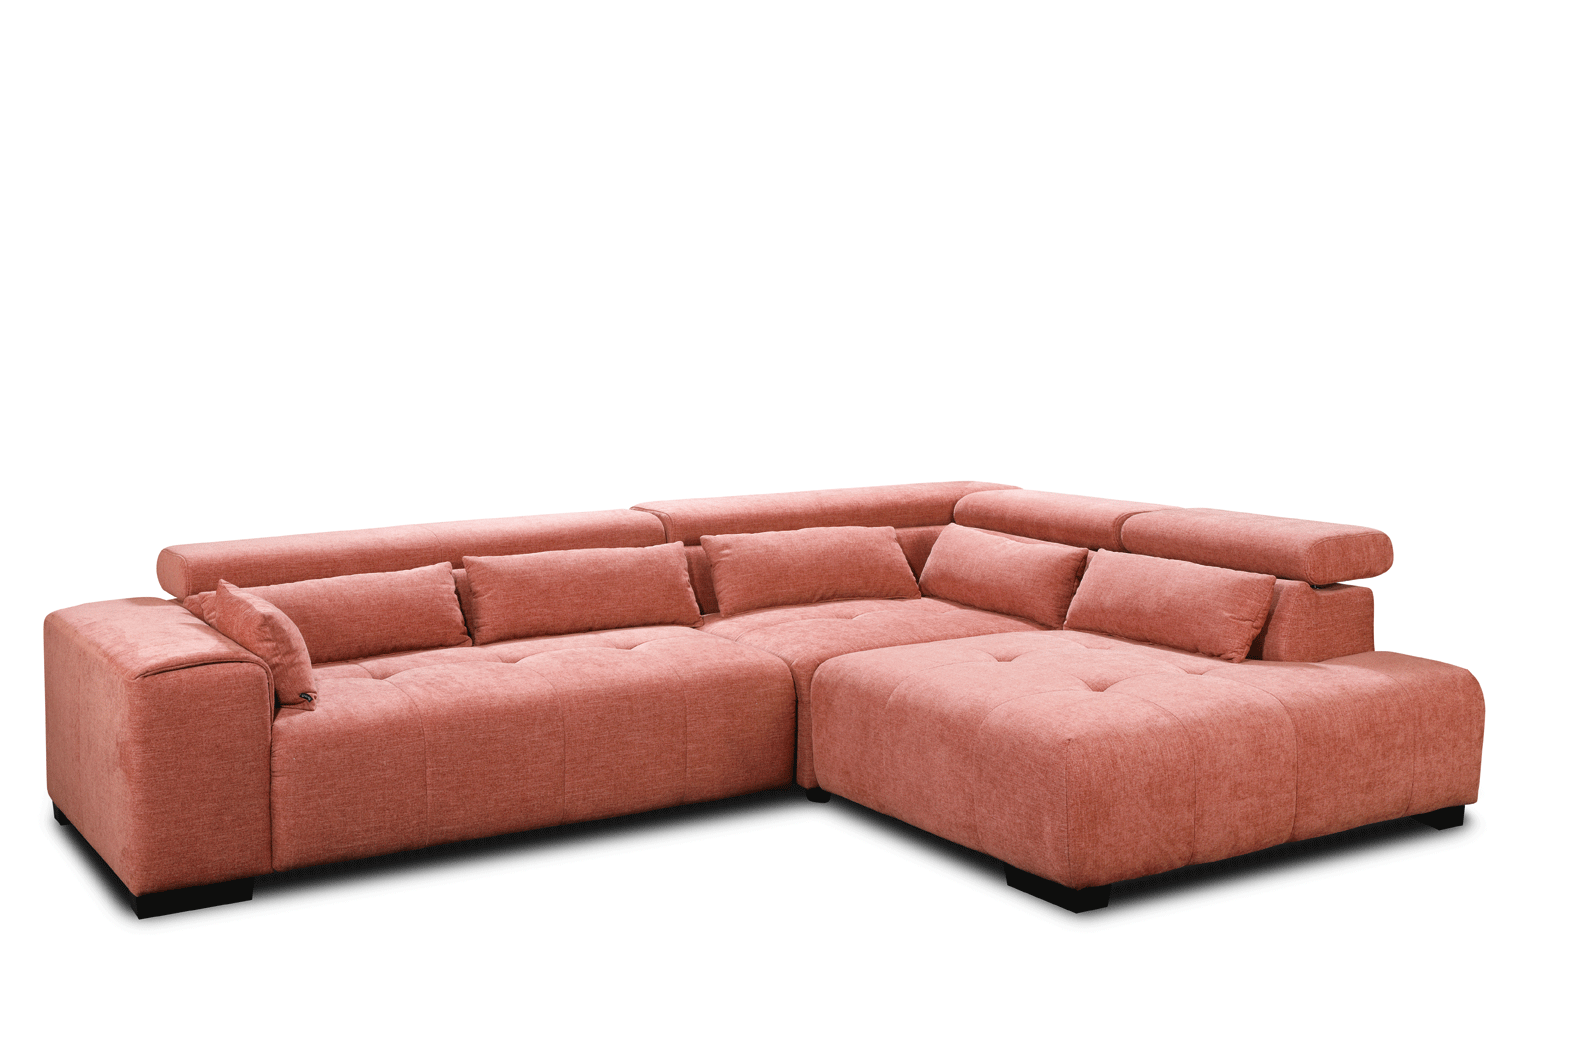 Living Room Furniture Reclining and Sliding Seats Sets Positano Sectional w/Bed & Storage